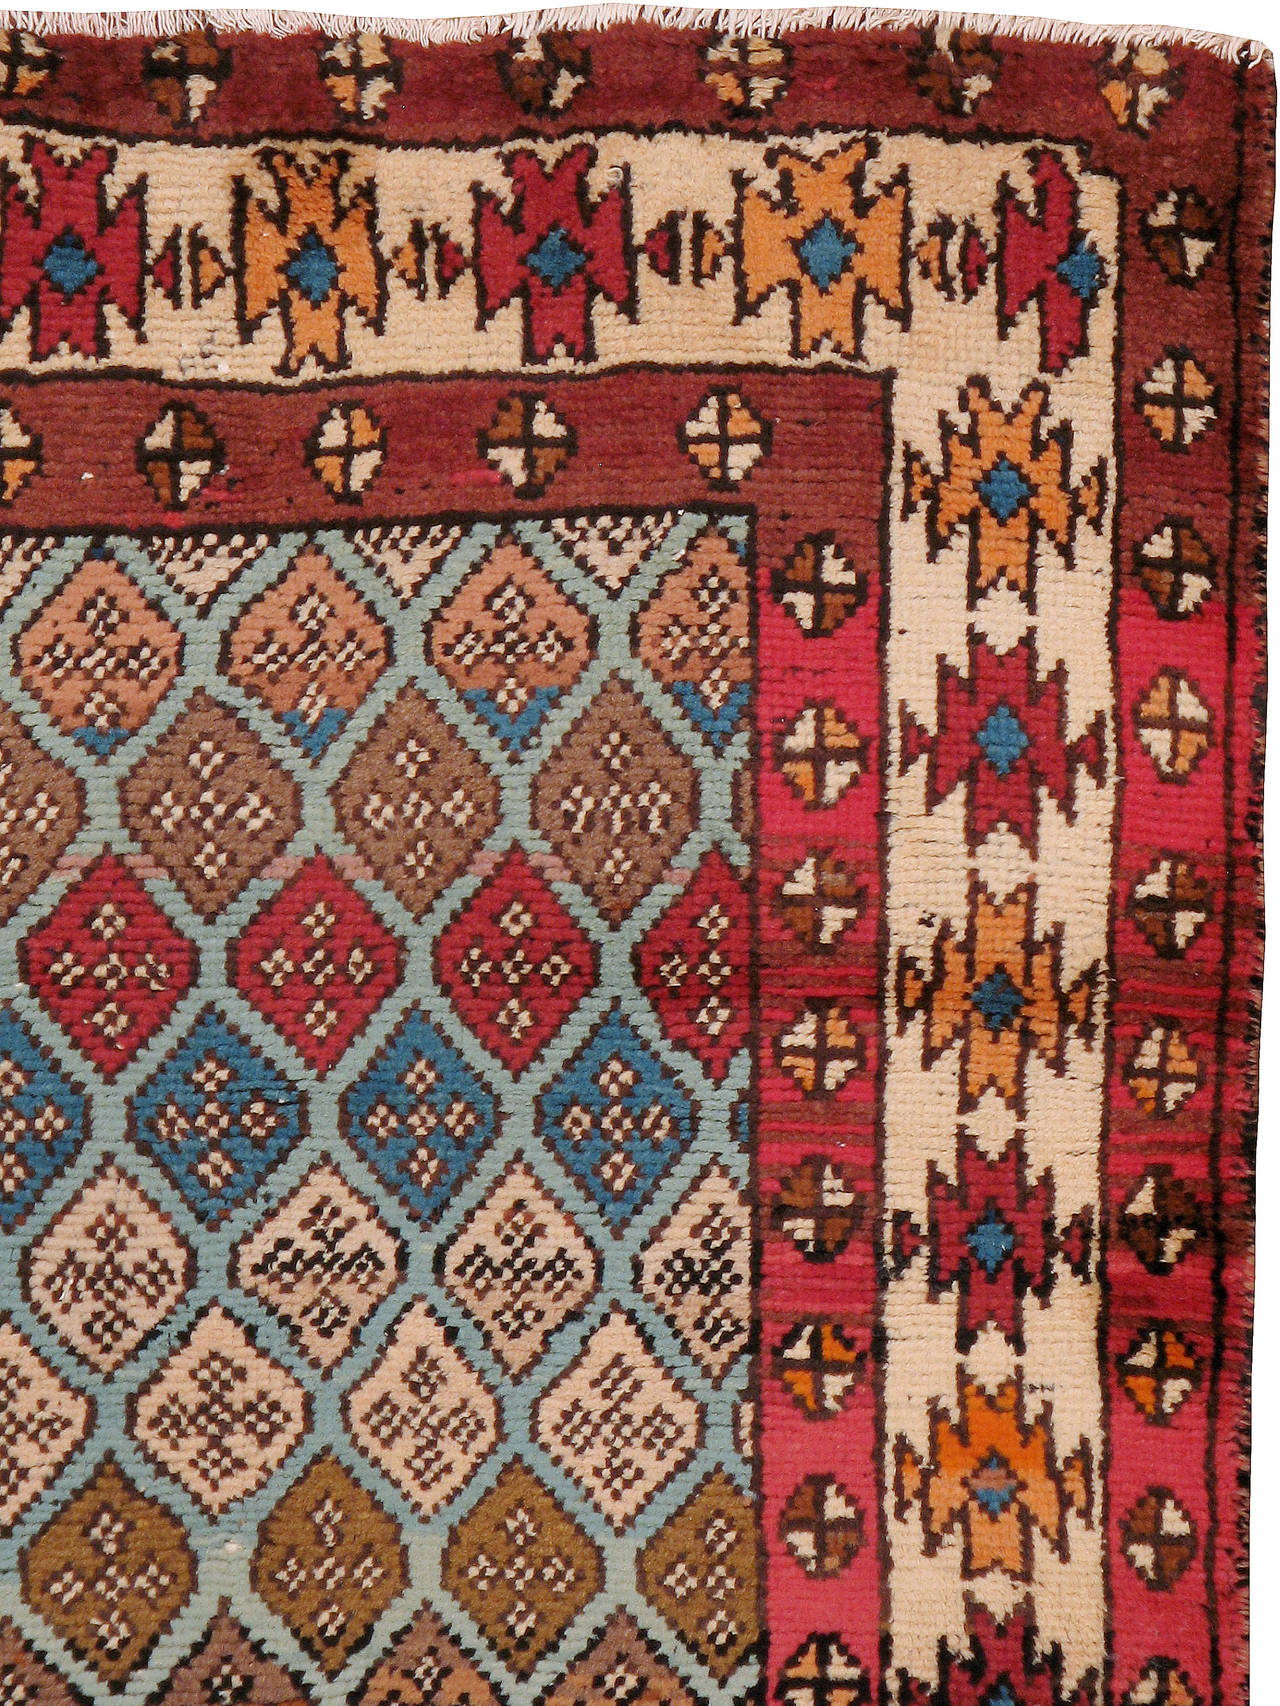 A vintage Persian Kurd carpet from the second quarter of the 20th century.